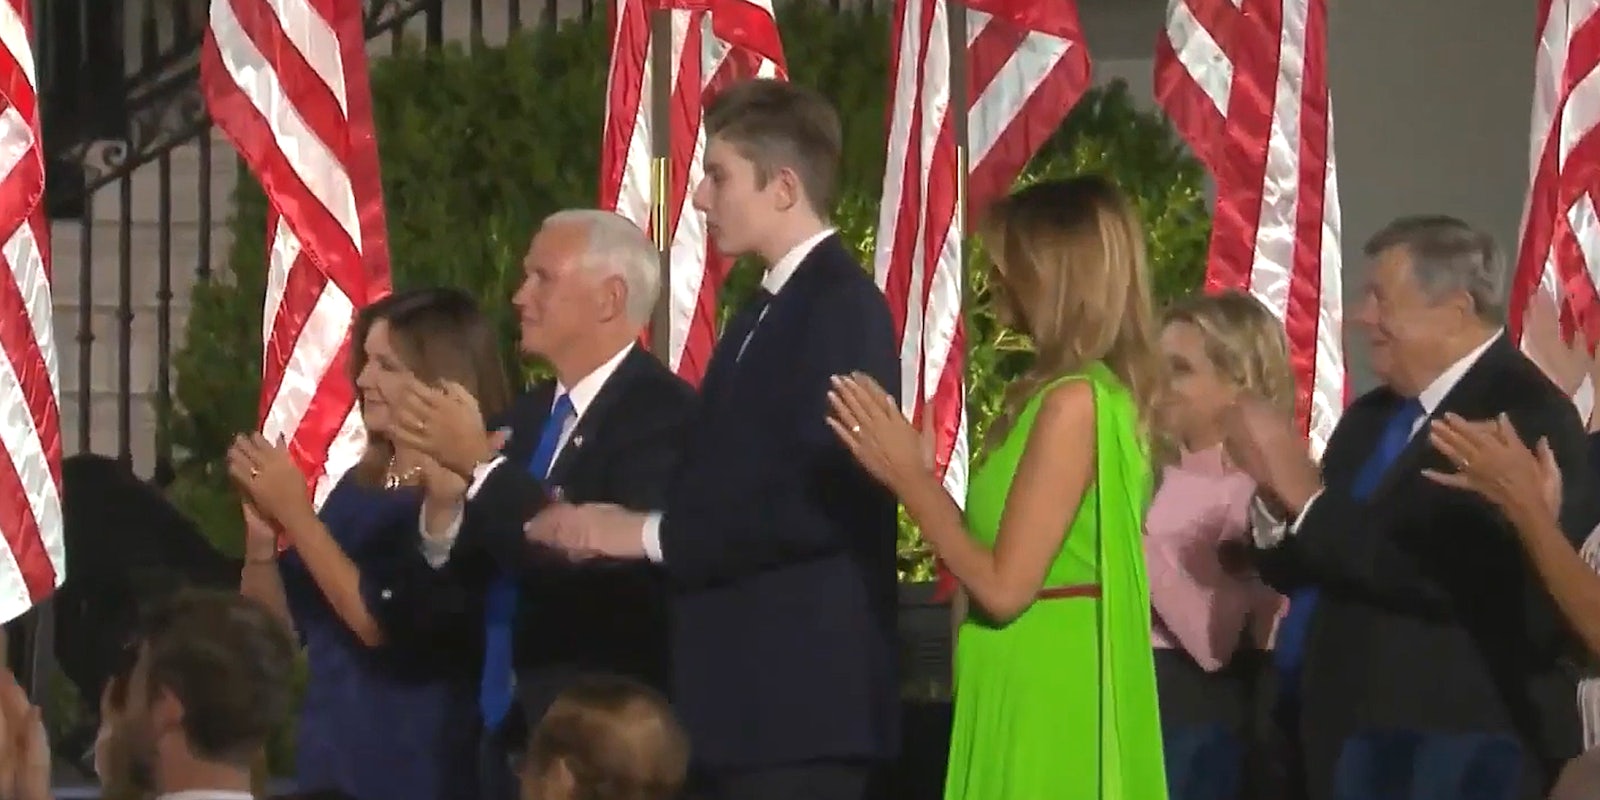 Mike and Karen Pence applaud with Barron and Melania Trump at Republican National Convention